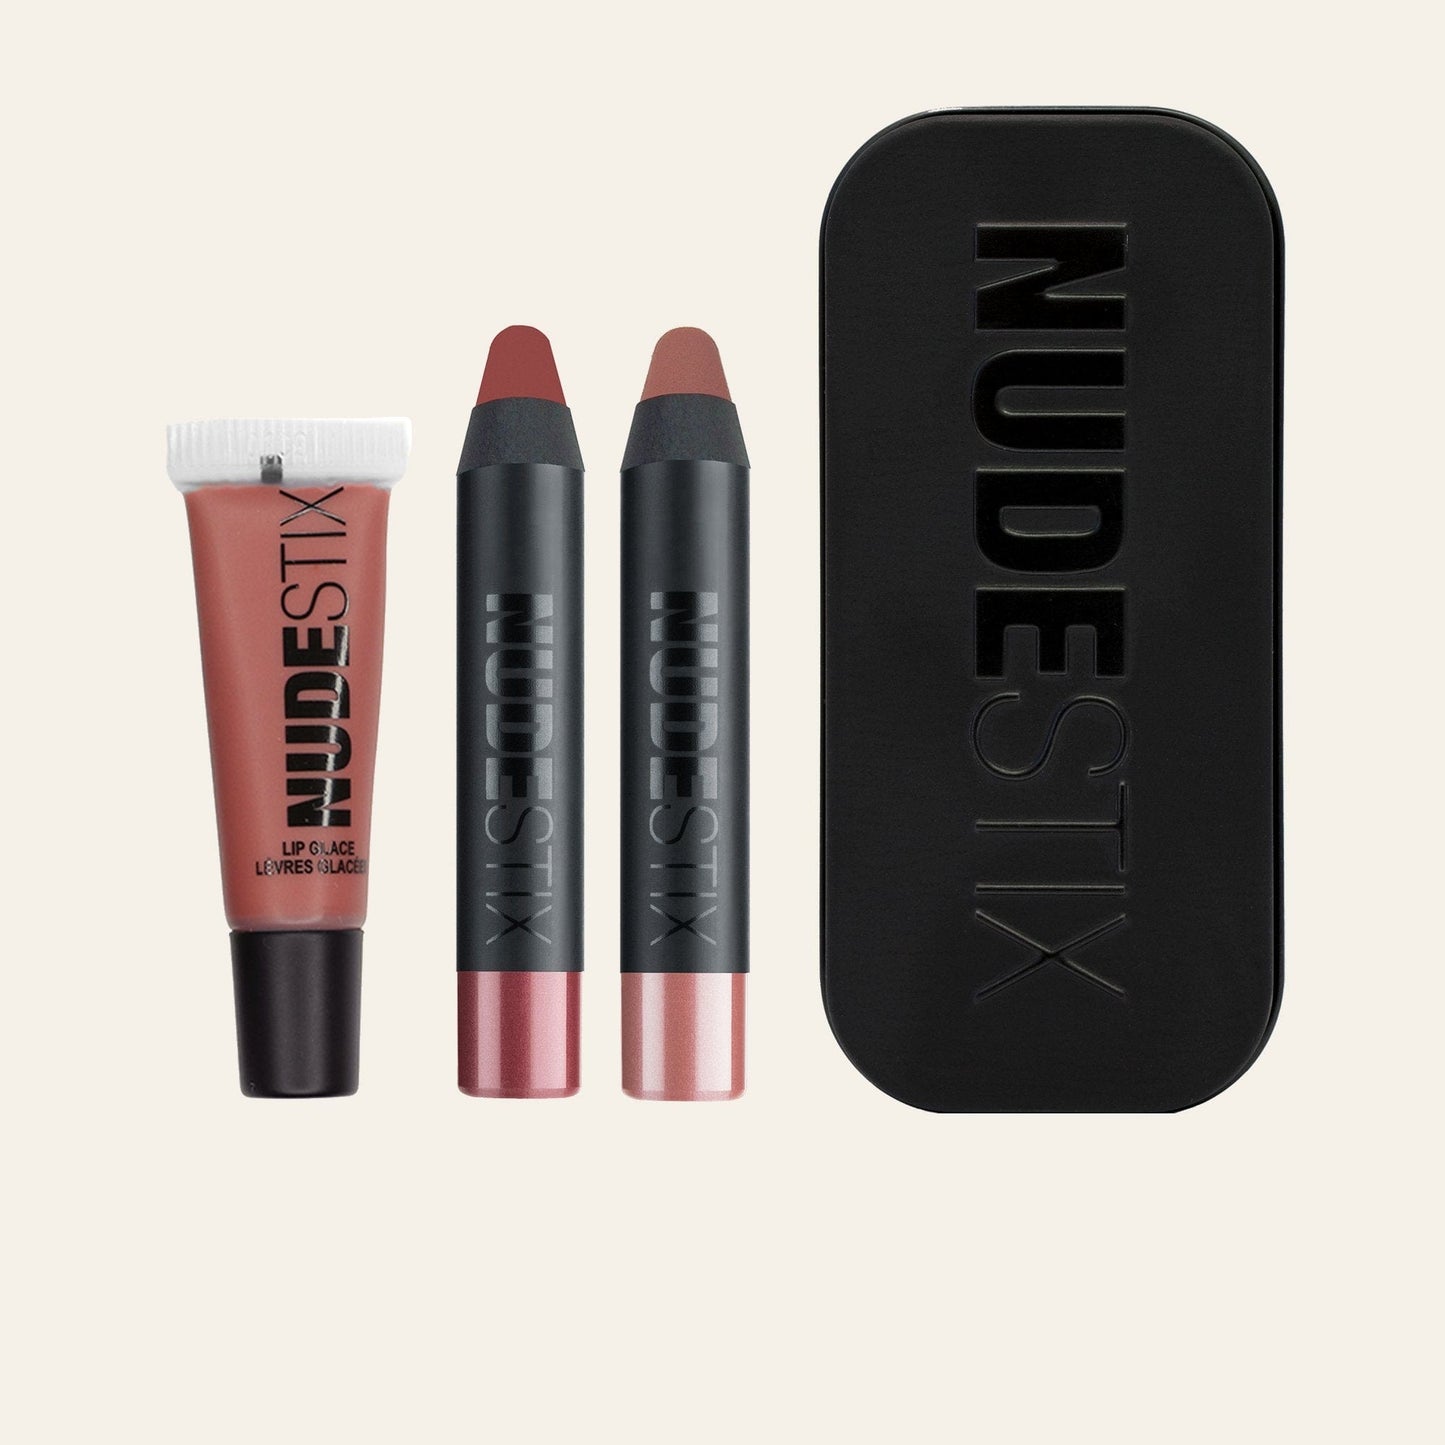 Nudestix Nude + Sultry Lips 3PC Mini Kit makeup products